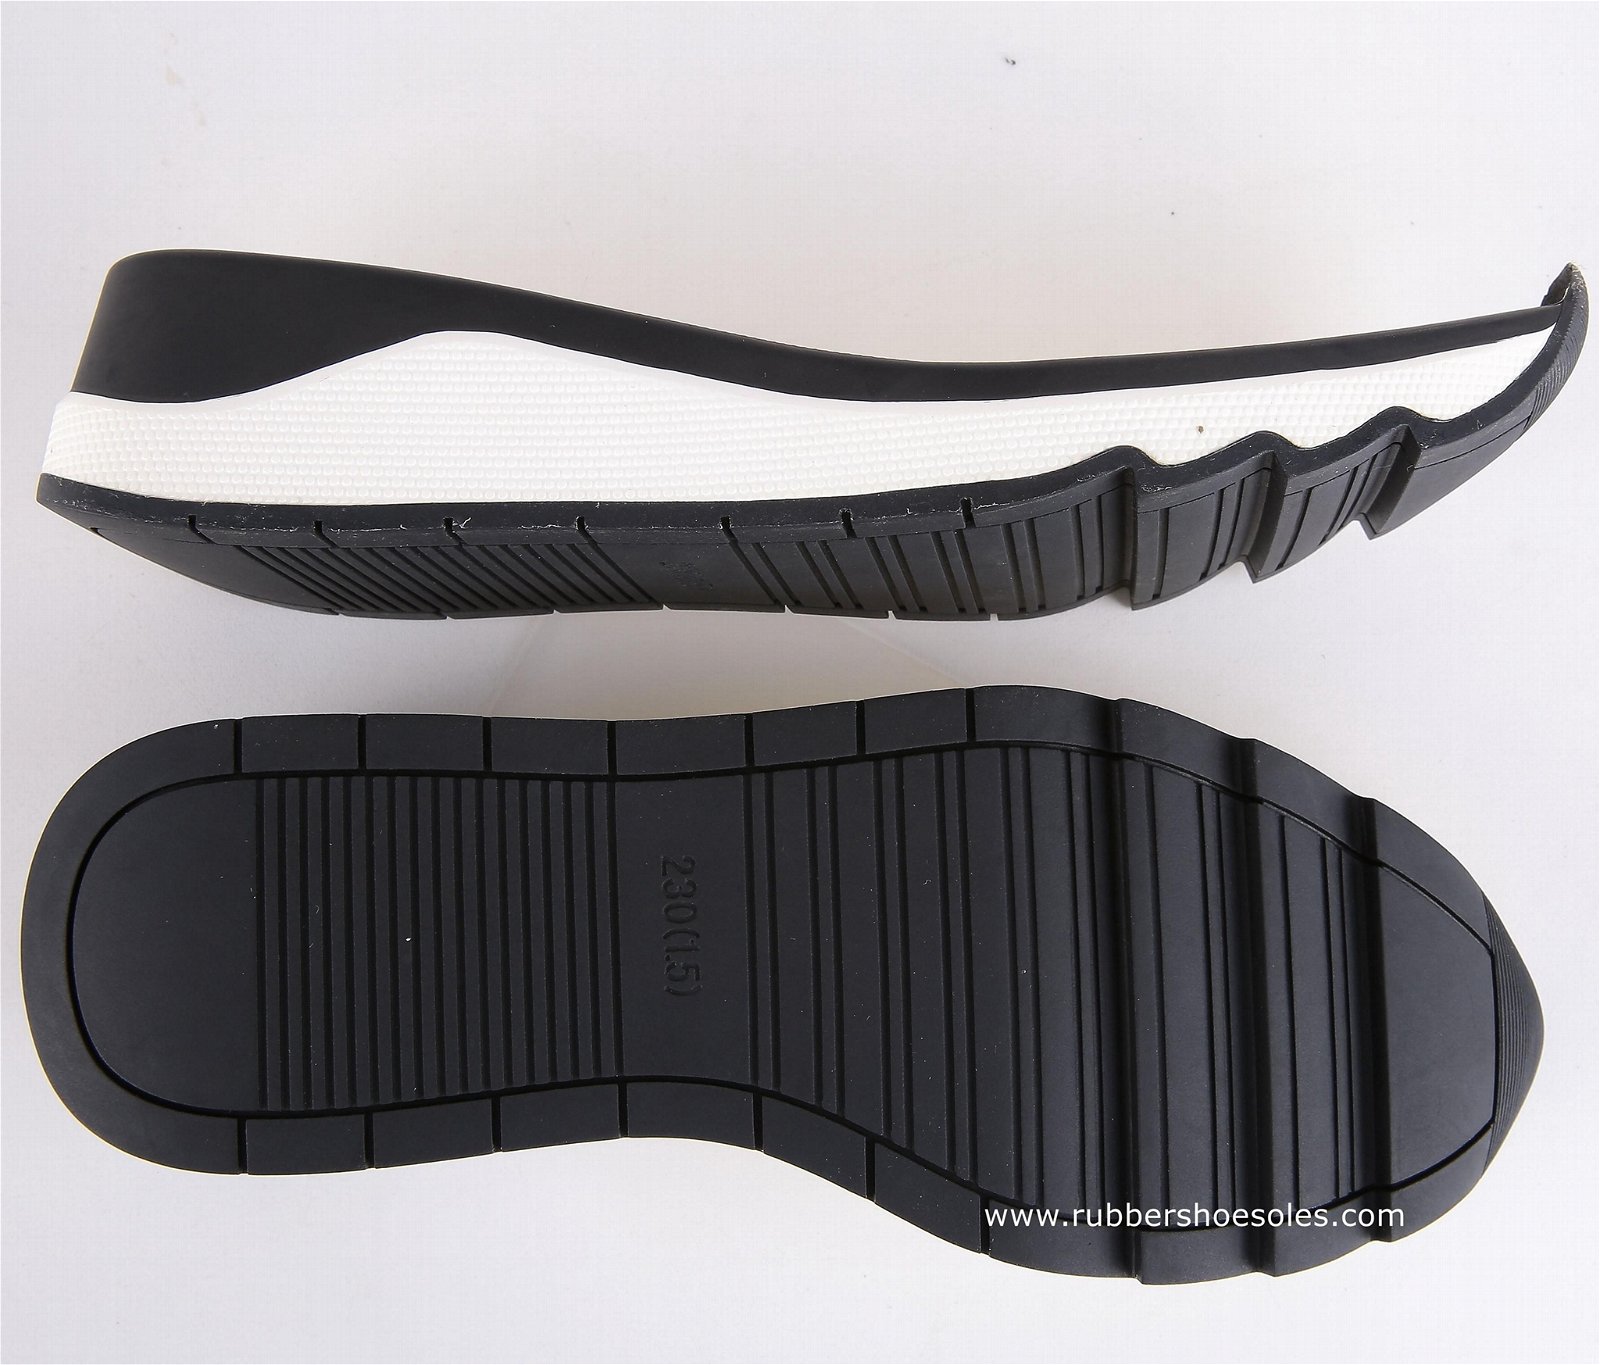 High quality vulcanized sole crepe rubber flexible rubber sole